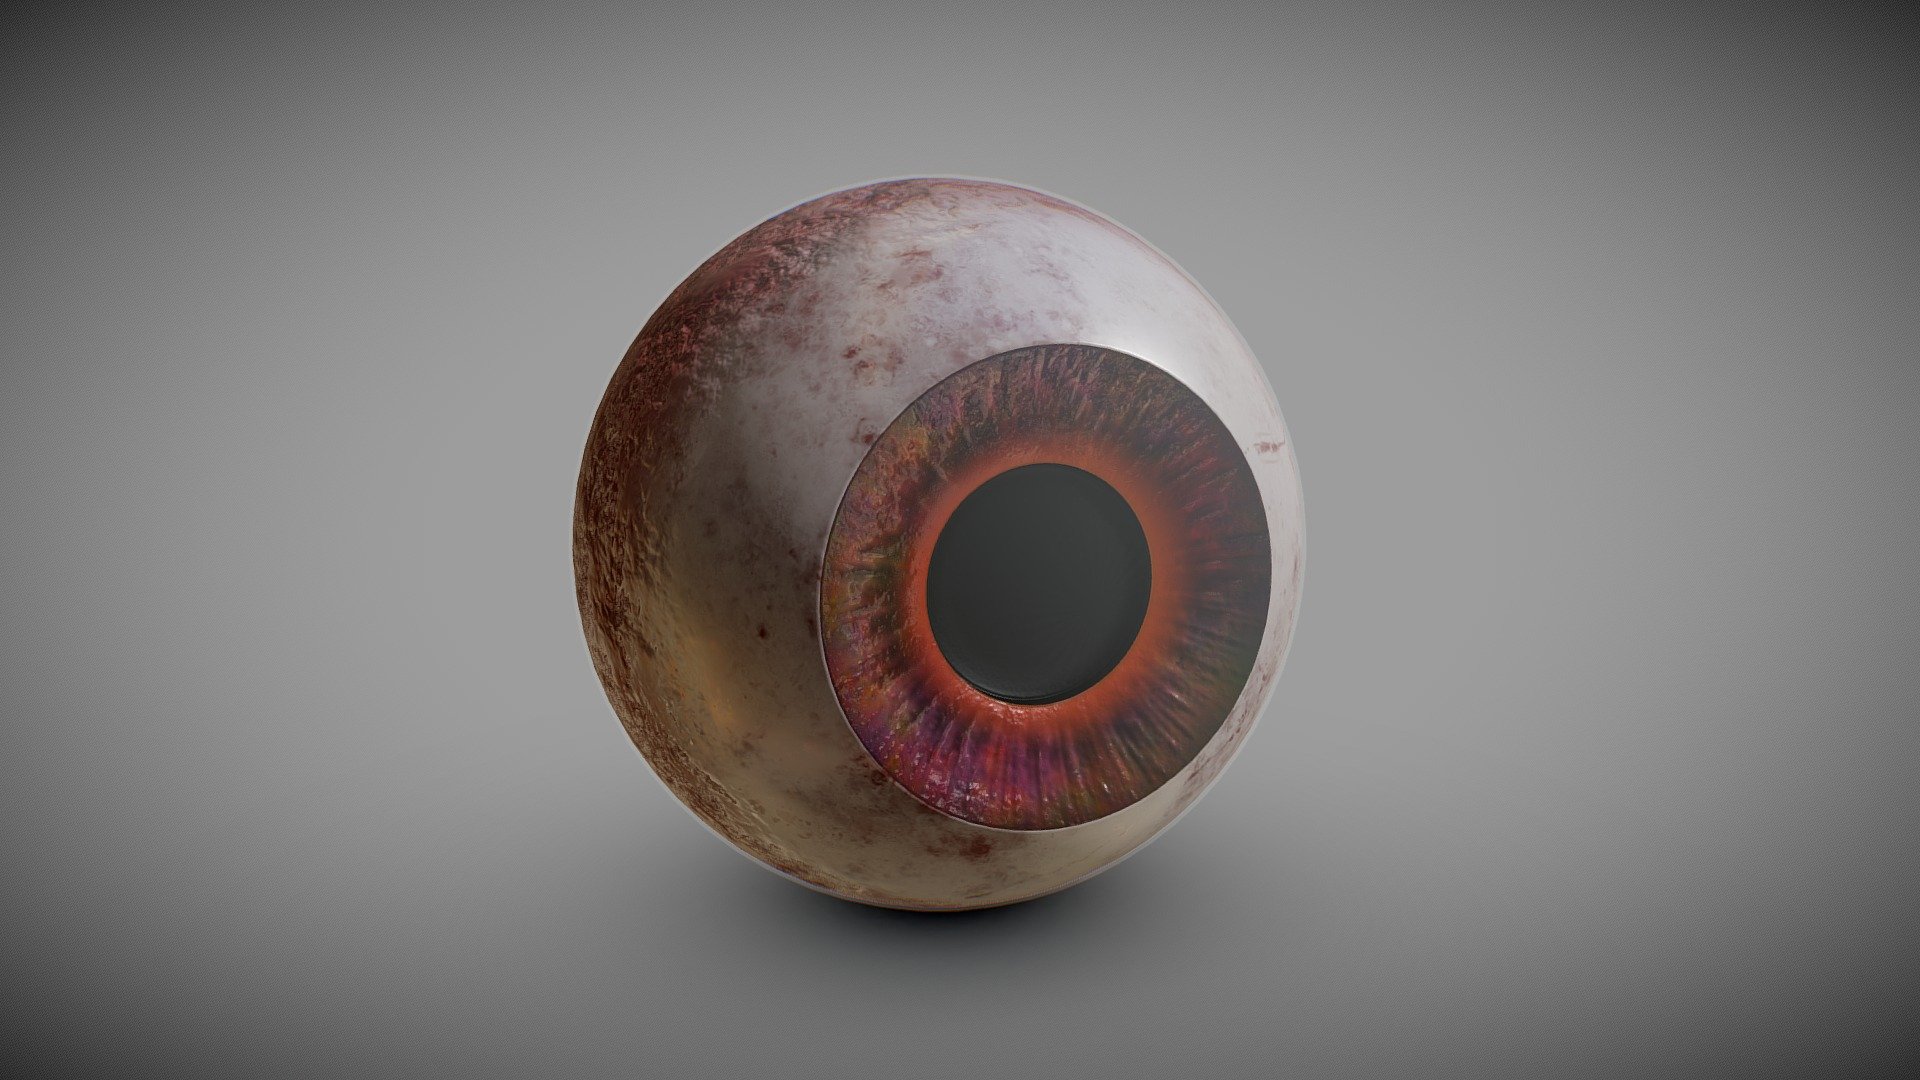 Modeled in Blender and textured in Substance Painter 3d model